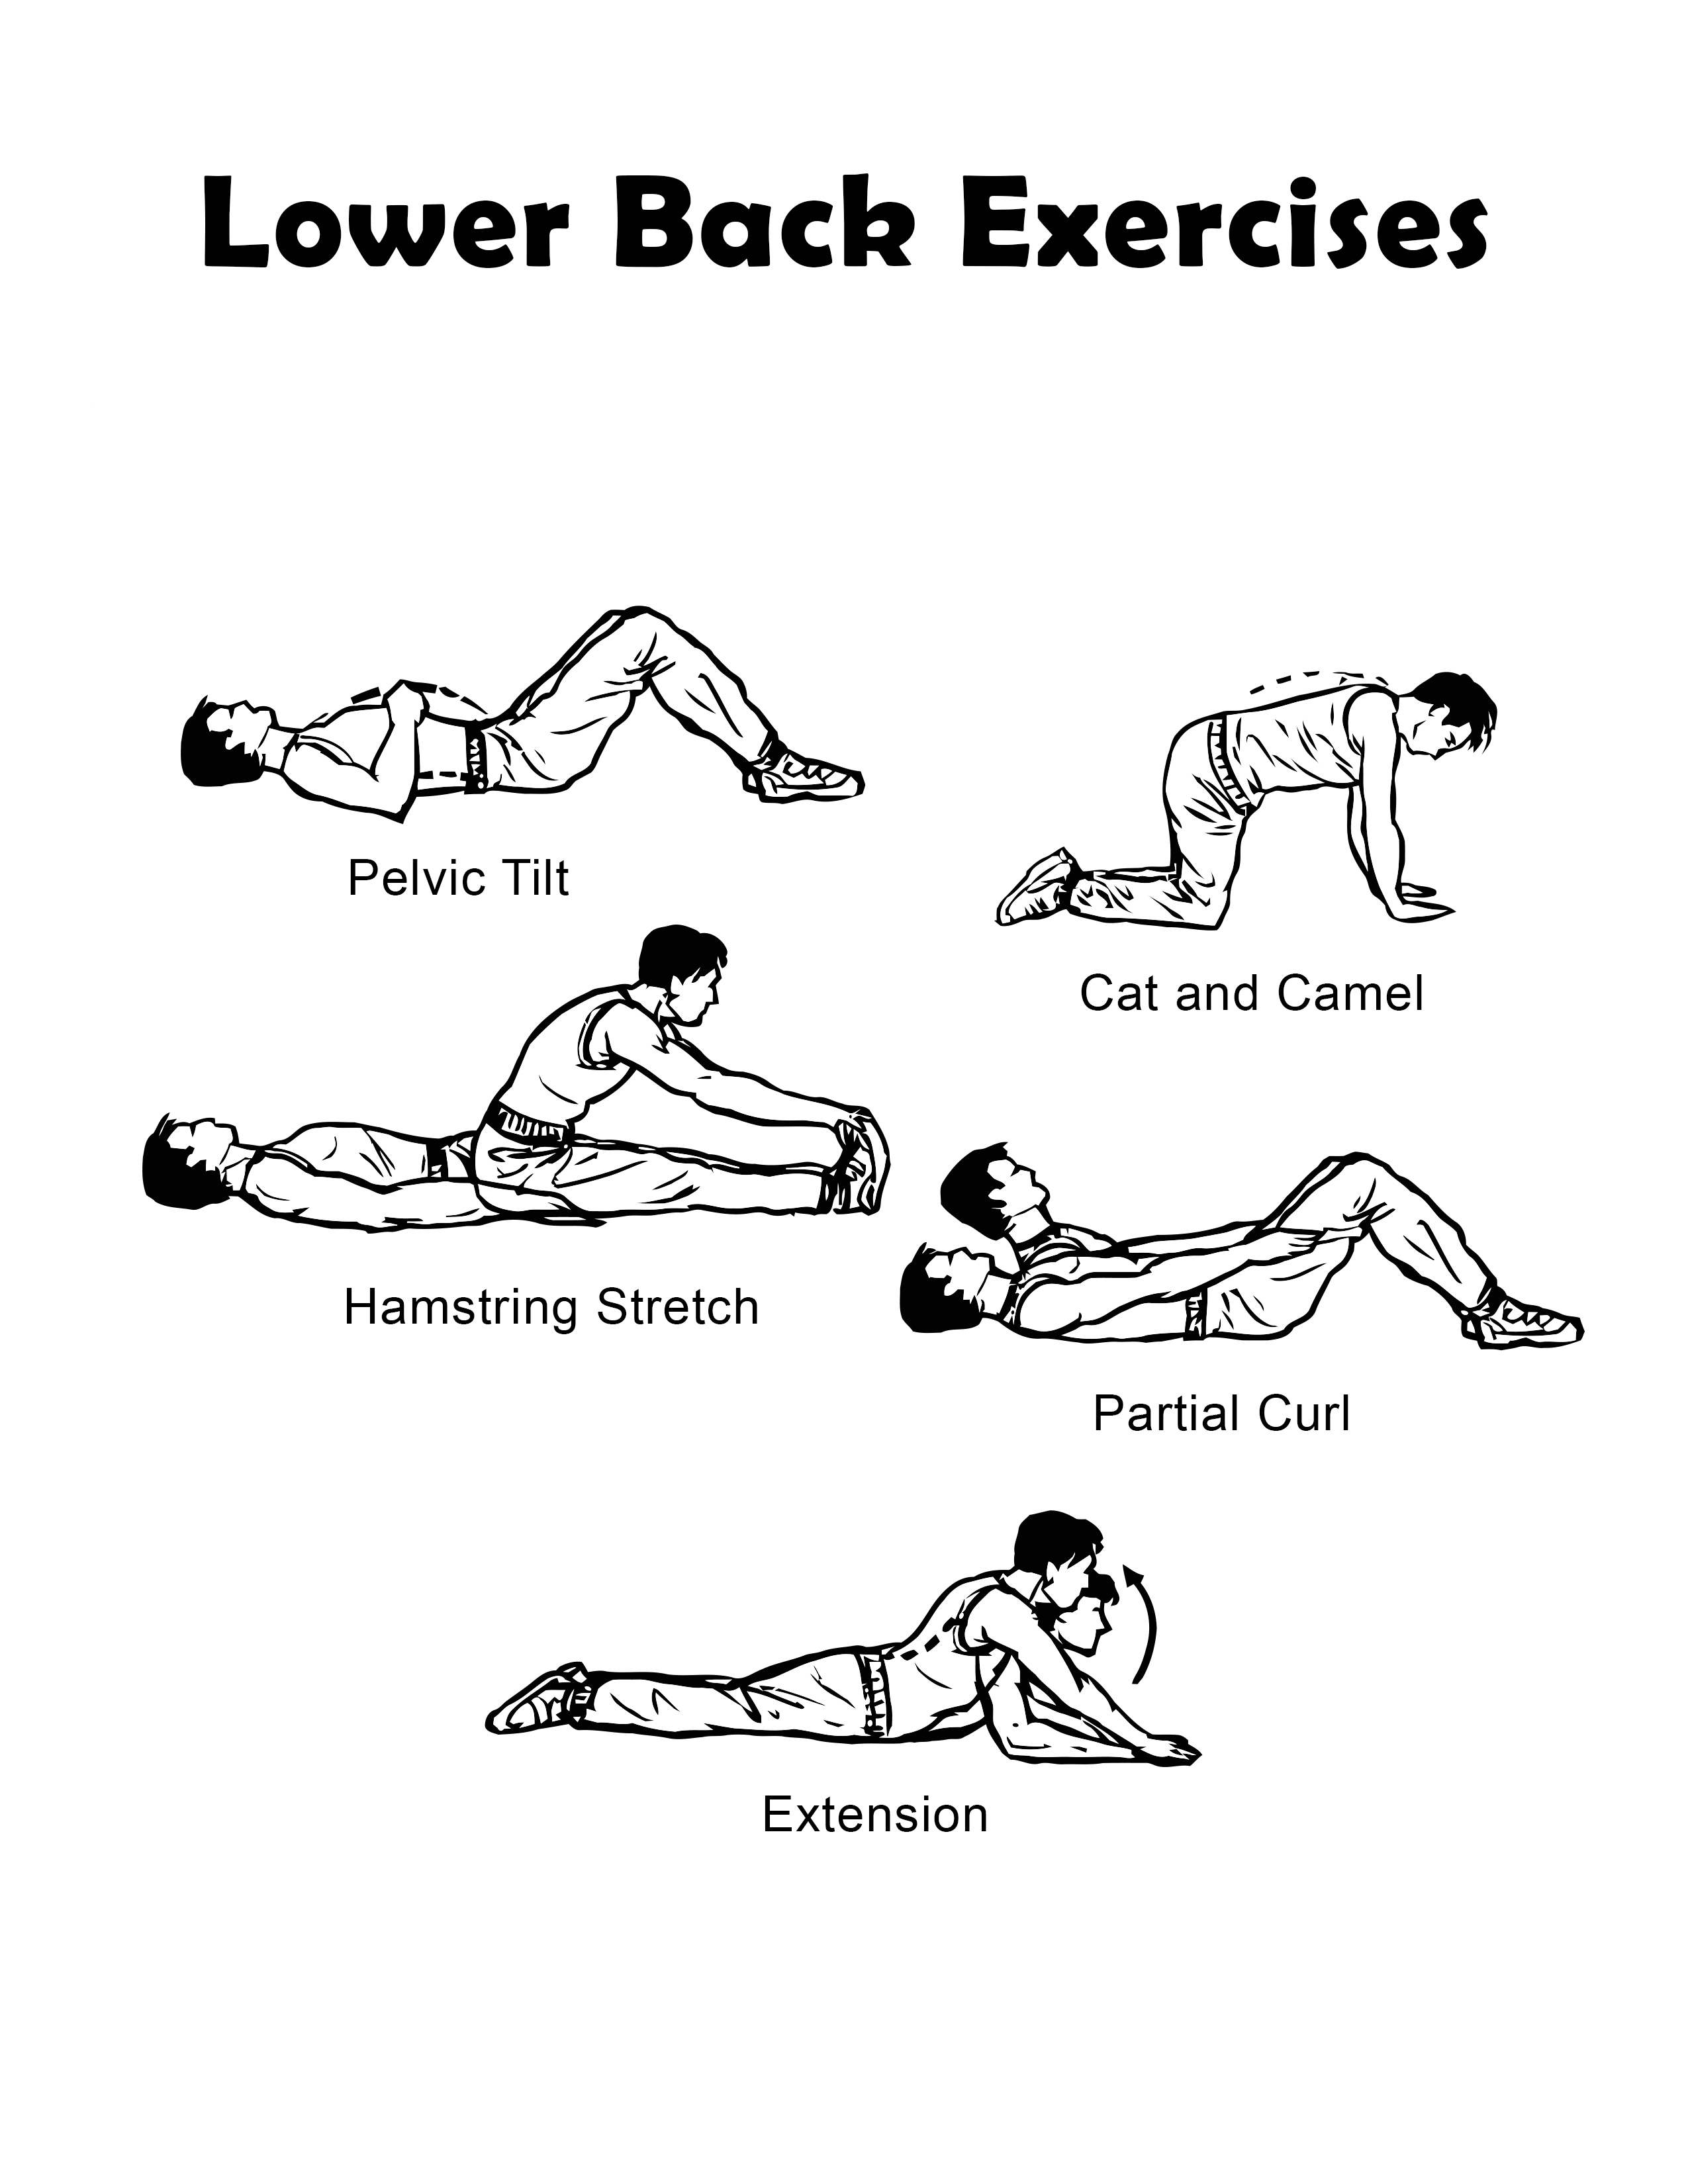 Lower back exercise chart you can download and print.